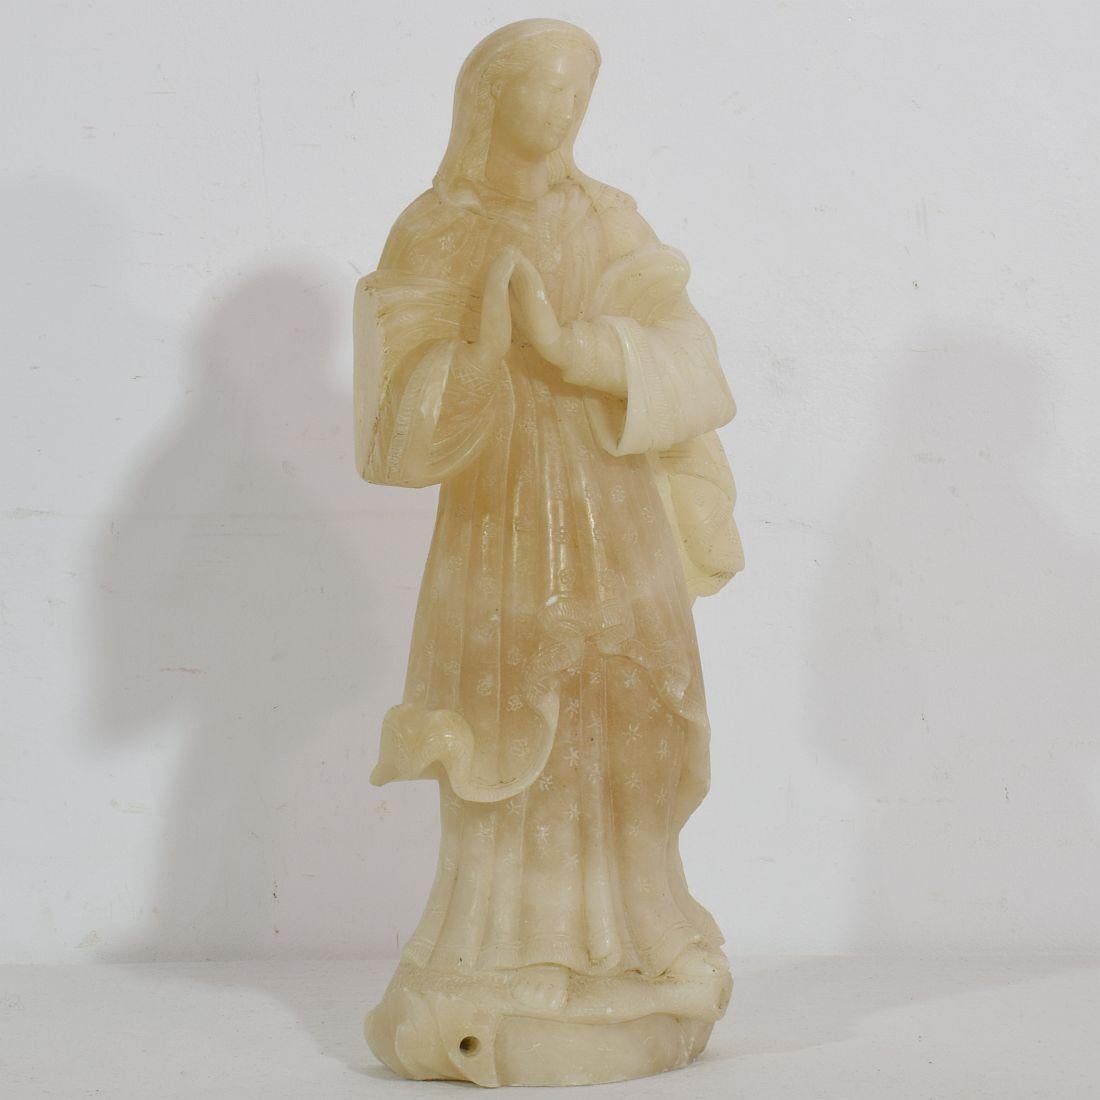 Beautiful small carved alabaster Madonna, France, circa 1780-1850.
Weathered and some minor losses.
More photo's available on request.